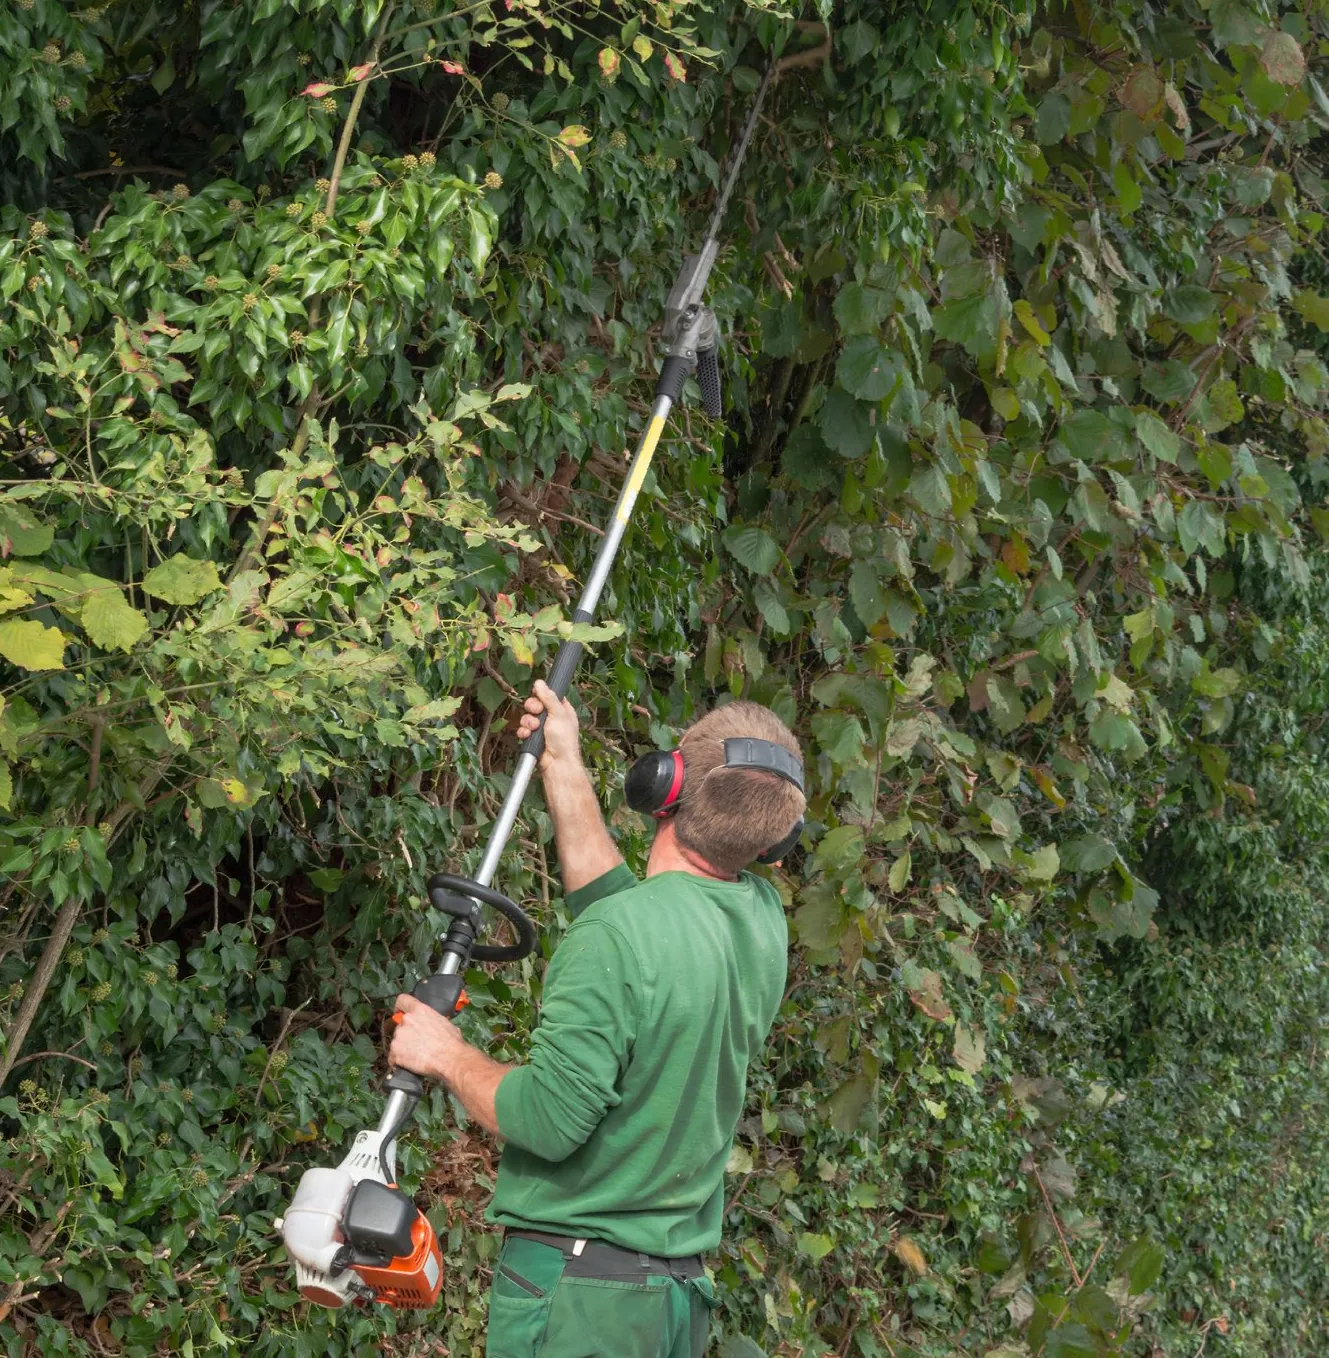 A man wearing a green uniform and protective headphones uses a long-handled hedge trimmer to cut green branches from trees as part of the tree services offered by Fort Lauderdale arborists.